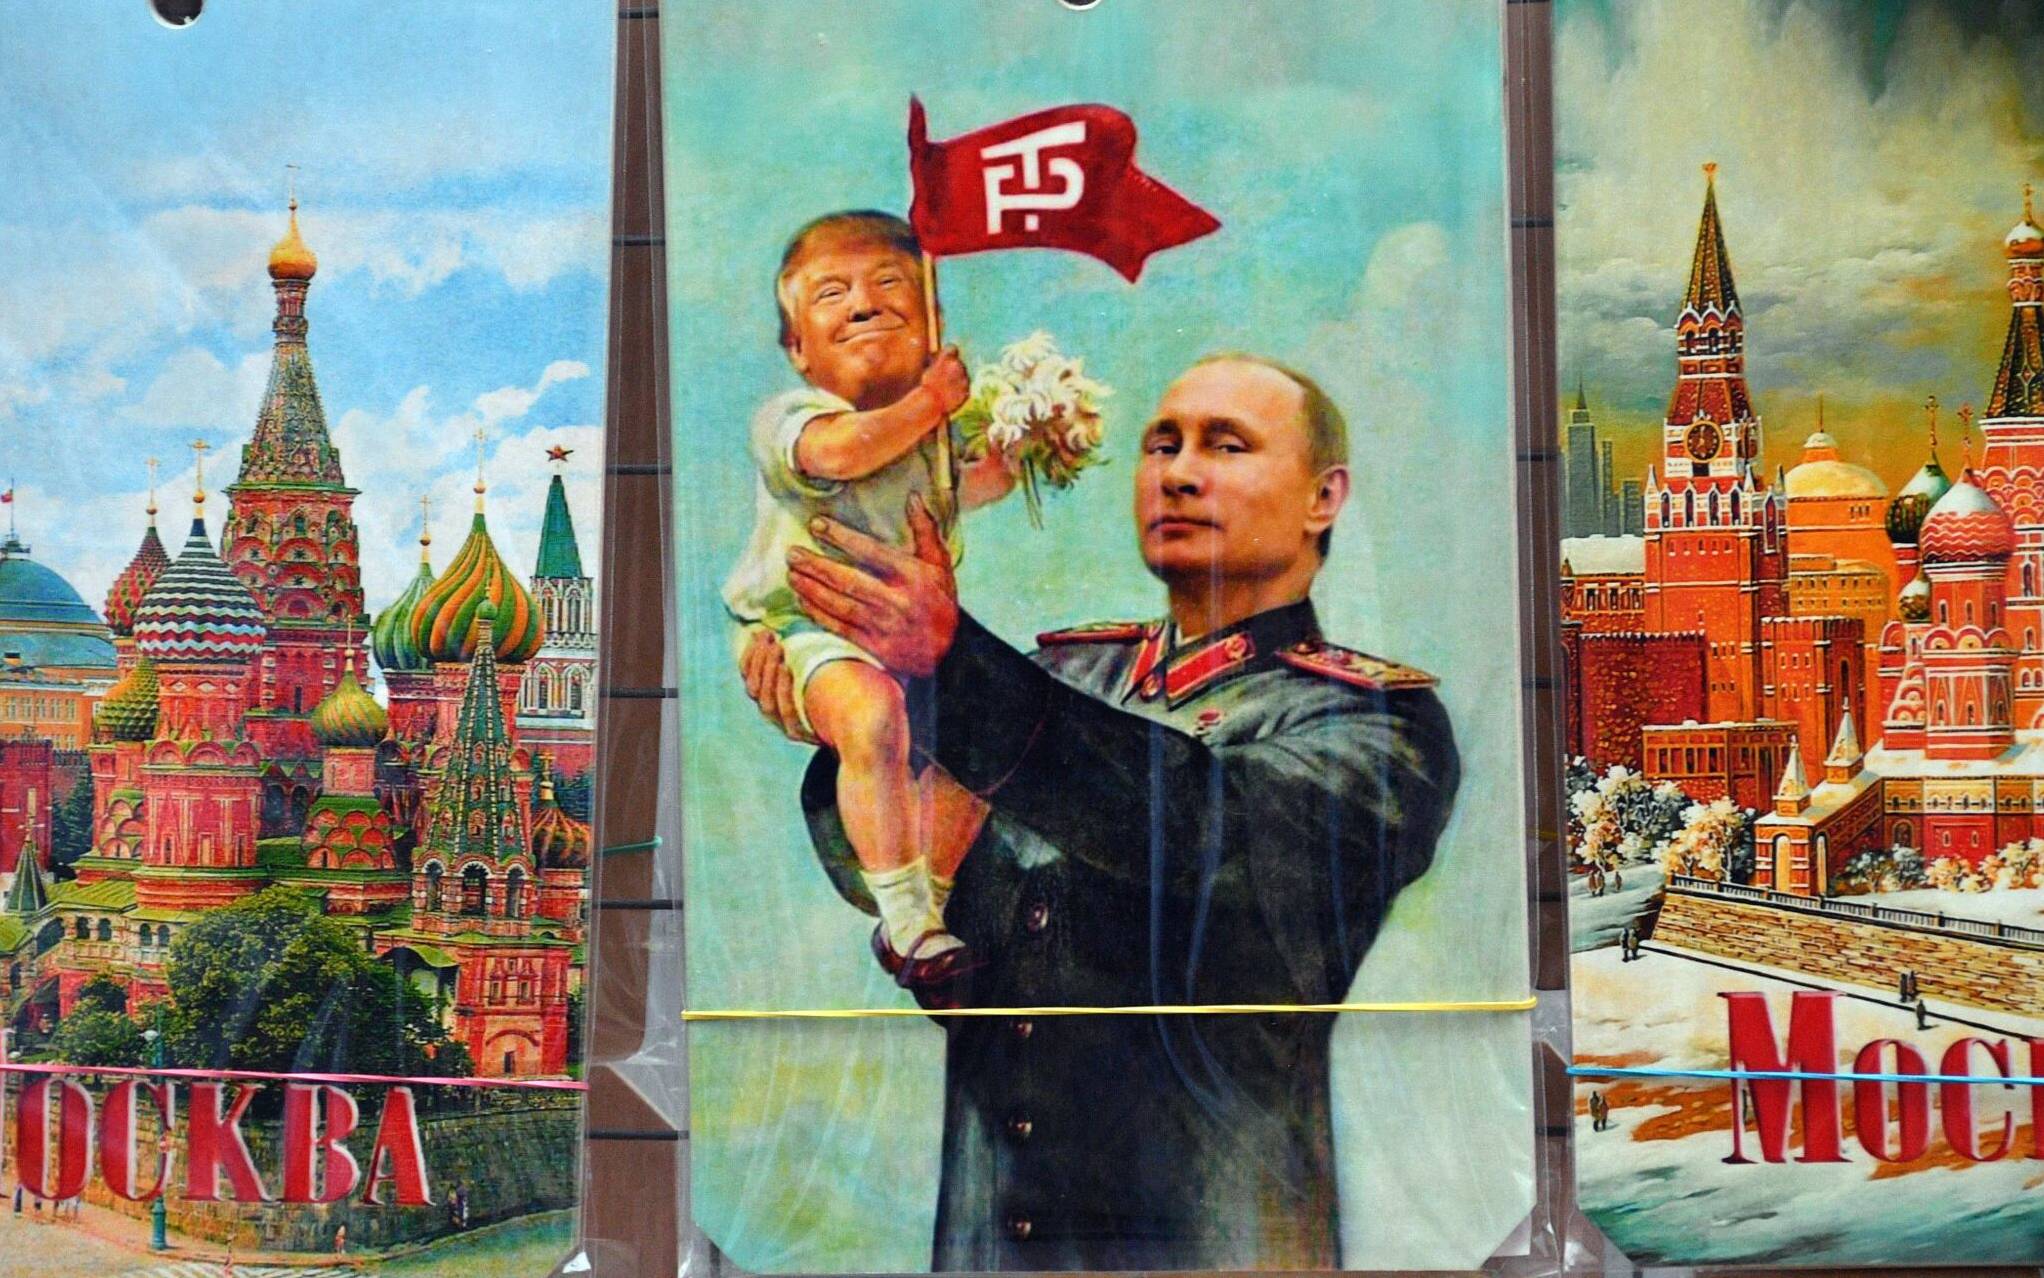 A picture taken on July 5, 2017 shows a souvenir kiosk offering among others a drawing depicting Russian President Vladimir Putin holding a baby with the face of US President Donald Trump, based upon a propaganda poster showing late soviet leader Joseph Stalin holding a baby, in Moscow. - It was a constant refrain on the campaign trail for Donald Trump in his quest for the US presidency: "We're going to have a great relationship with Putin and Russia."
Now, weighed down by claims that Moscow helped put him in the White House, Trump is set to finally meet his Russian counterpart in an encounter fraught with potential danger for the struggling American leader. (Photo by Mladen ANTONOV / AFP)